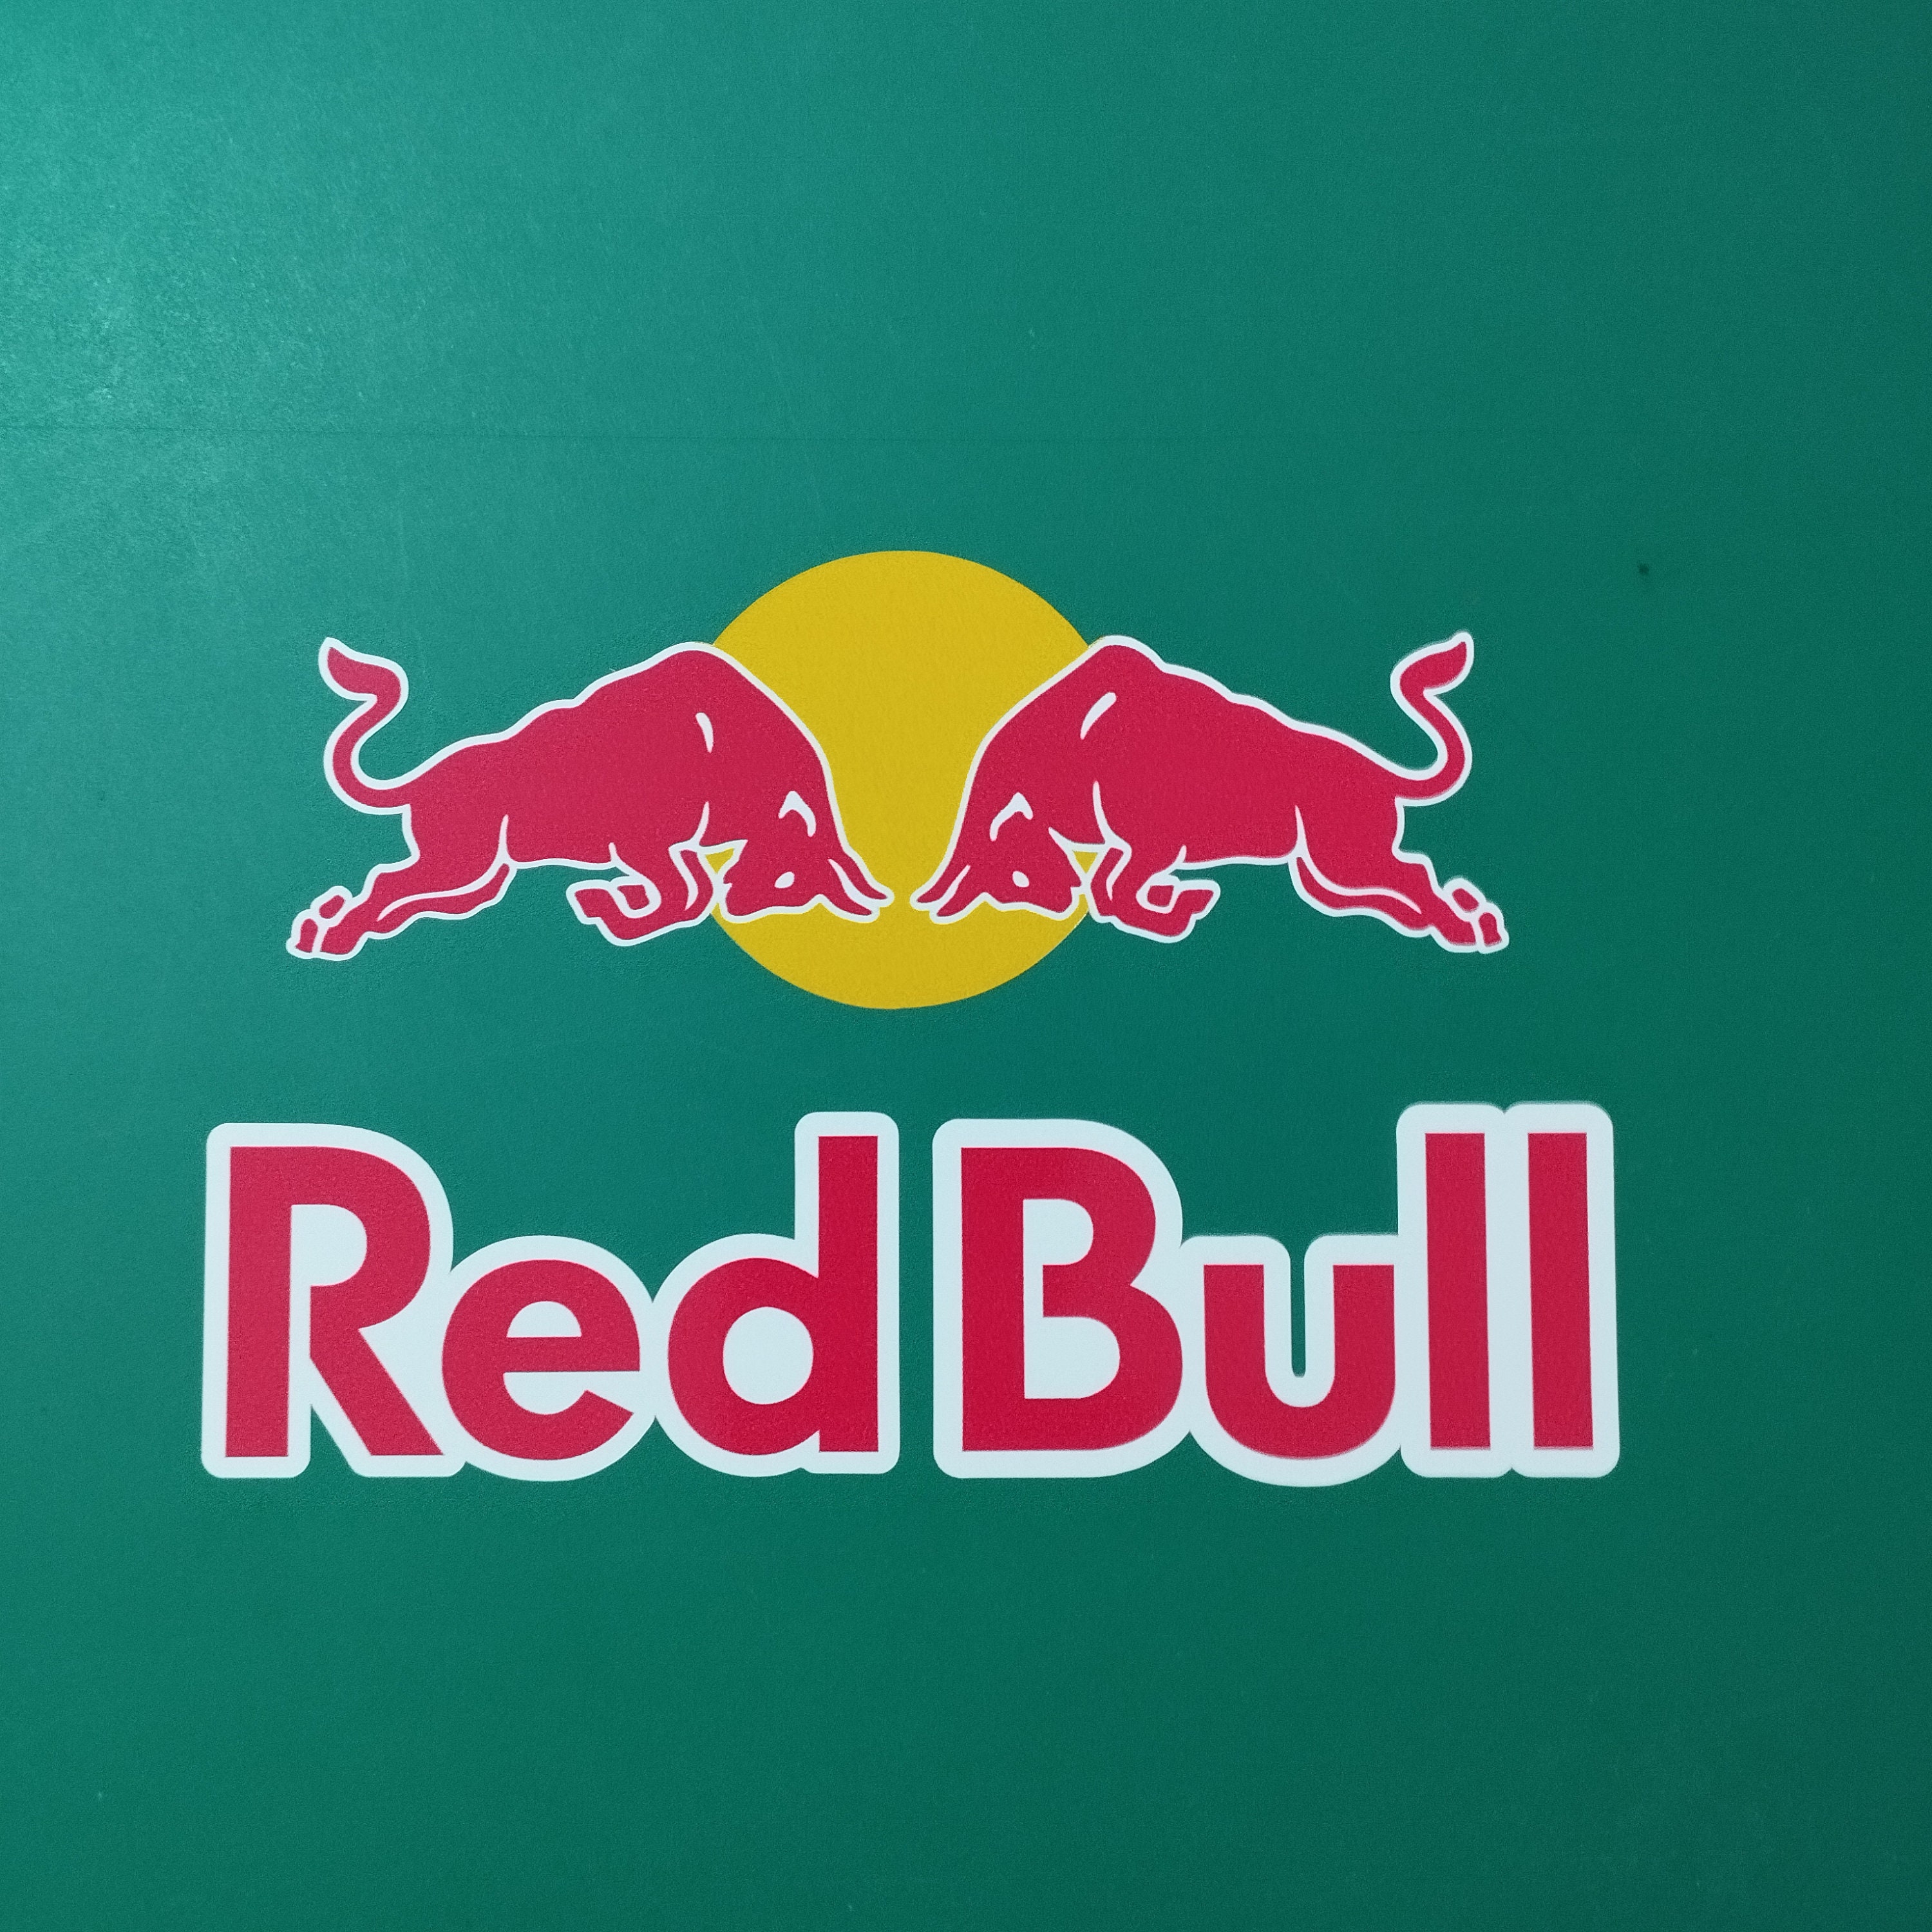 2 Red Bull Stickers Replica Vinyl Decals Adhesive Stickers for